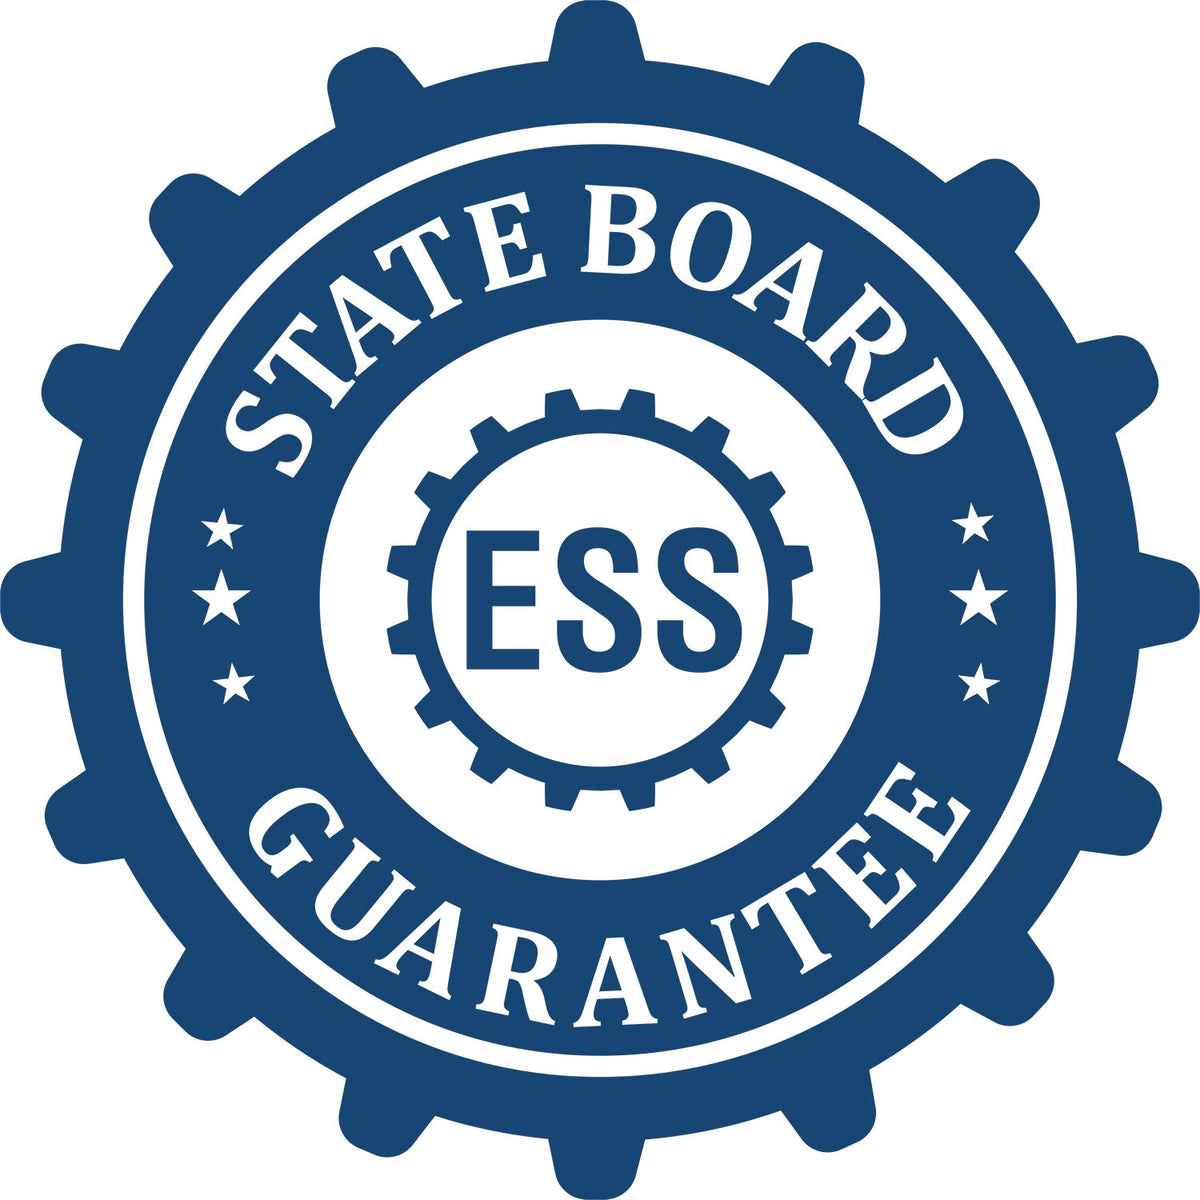 An emblem in a gear shape illustrating a state board guarantee for the Maryland Geologist Desk Seal